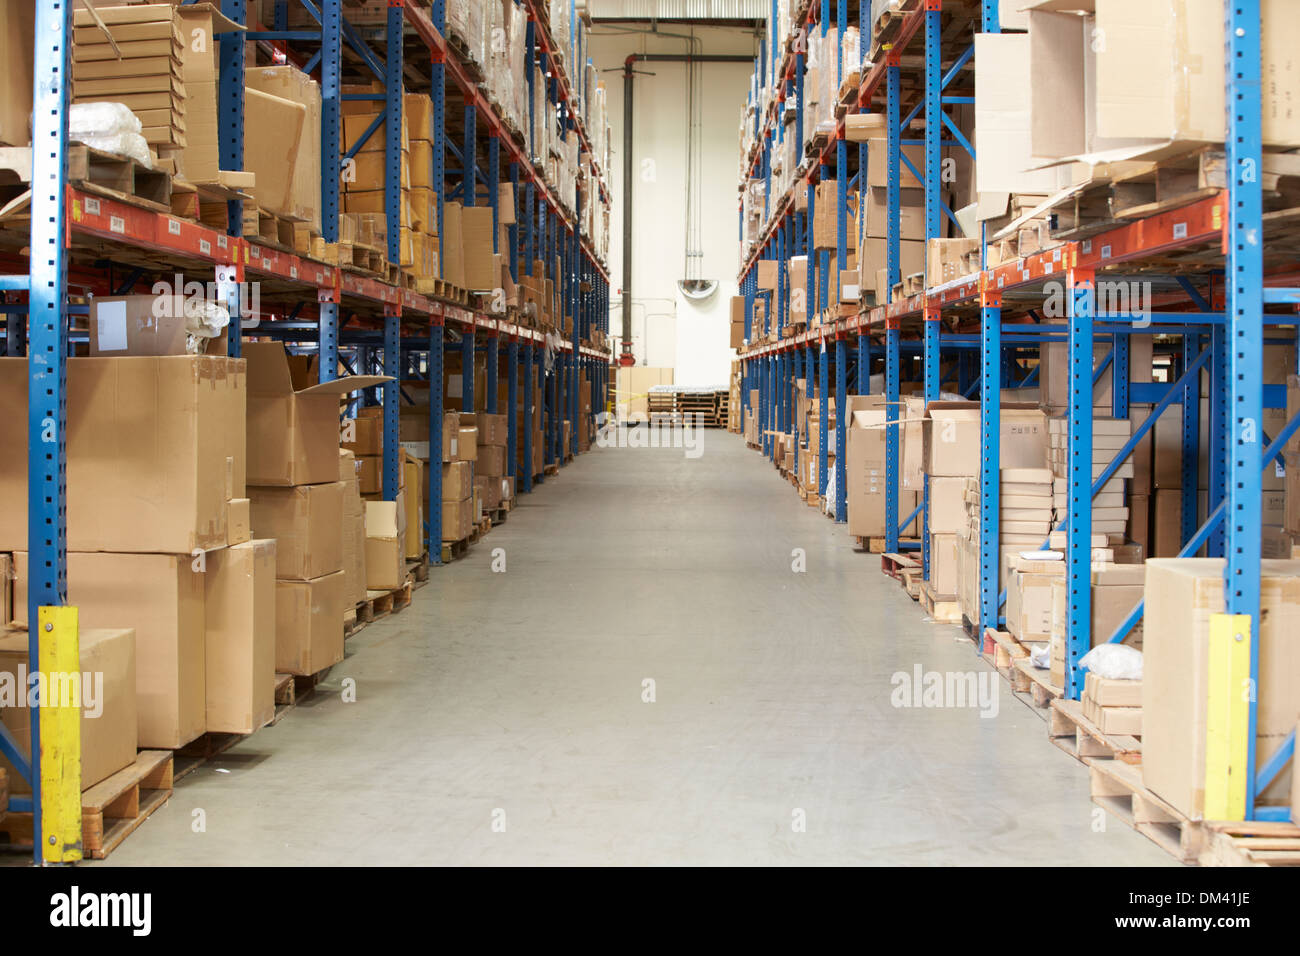 Interior Of Warehouse With Goods On Shelves Stock Photo